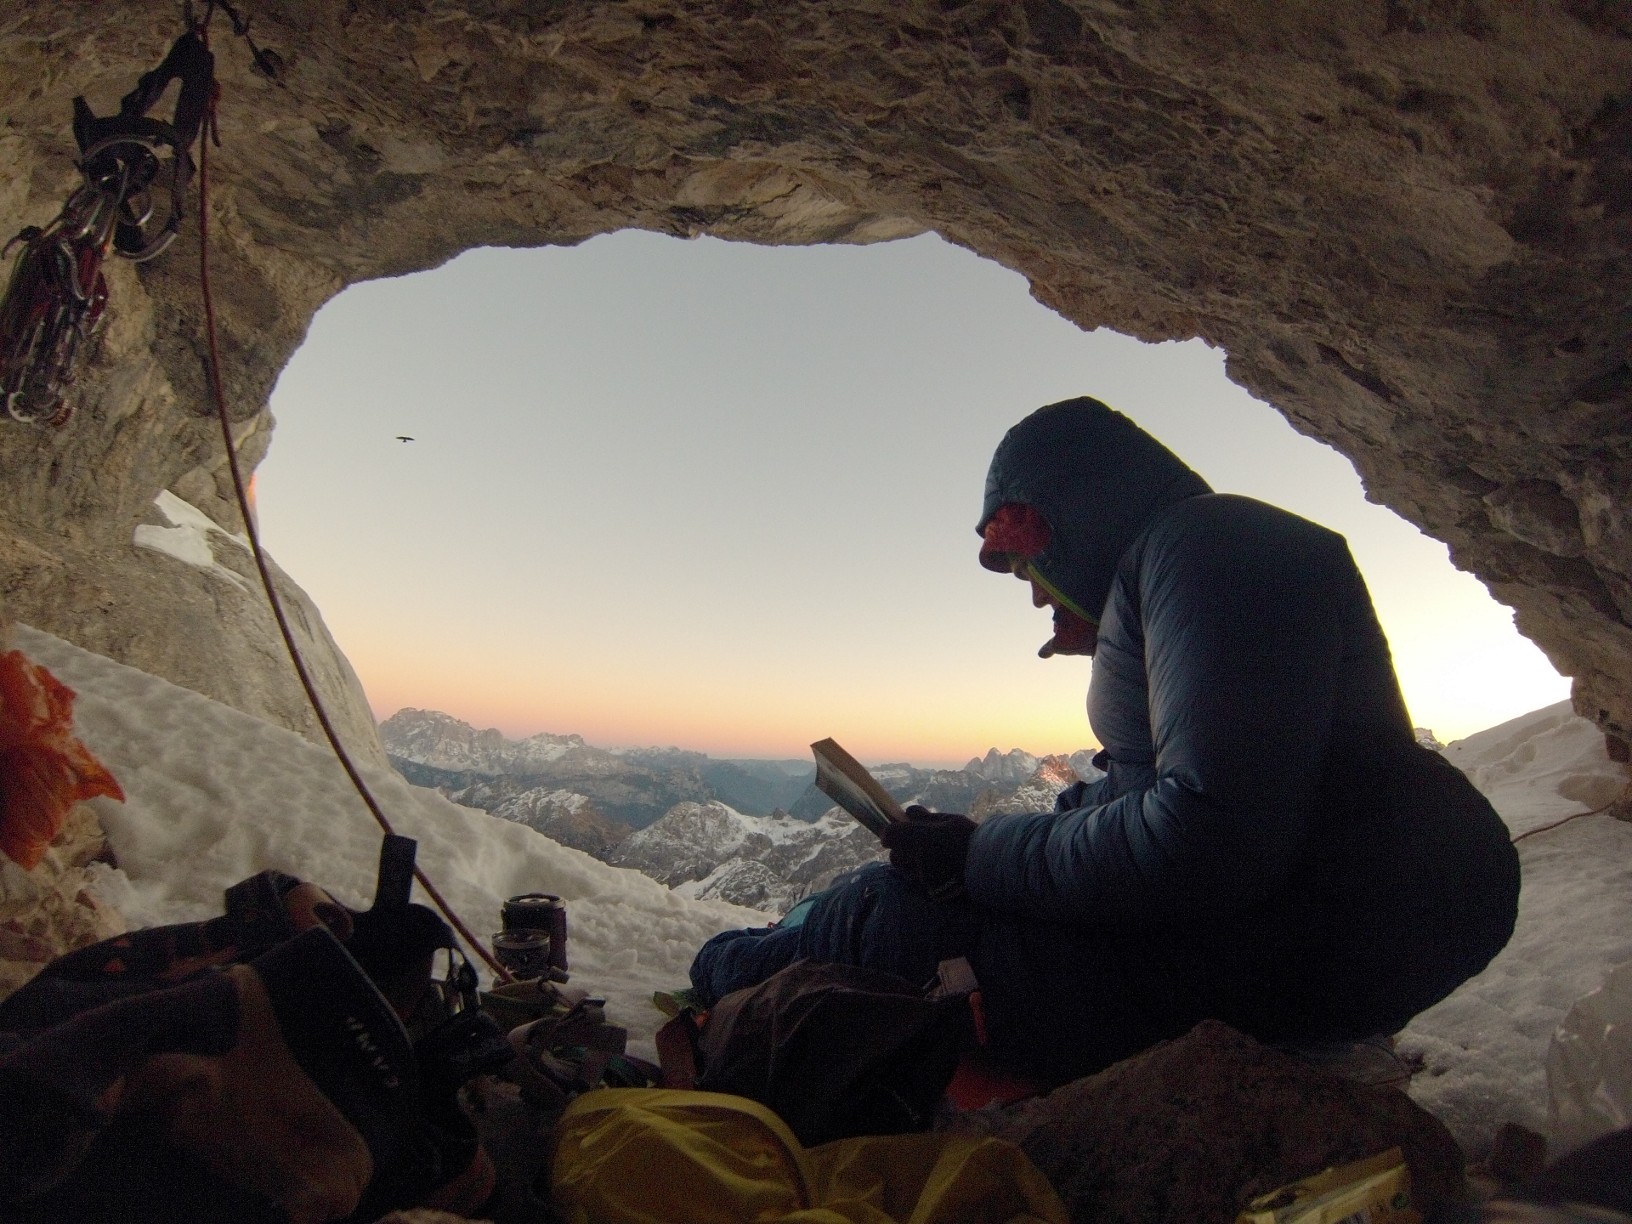 Ballard enjoys some reading on the comforts of a bivy ledge during his rope-solo of the Gogna Route (5.10, 800m) on Marmolada Punta Rocca (3309m), Dolomites, Italy. [Photo] Tom Ballard